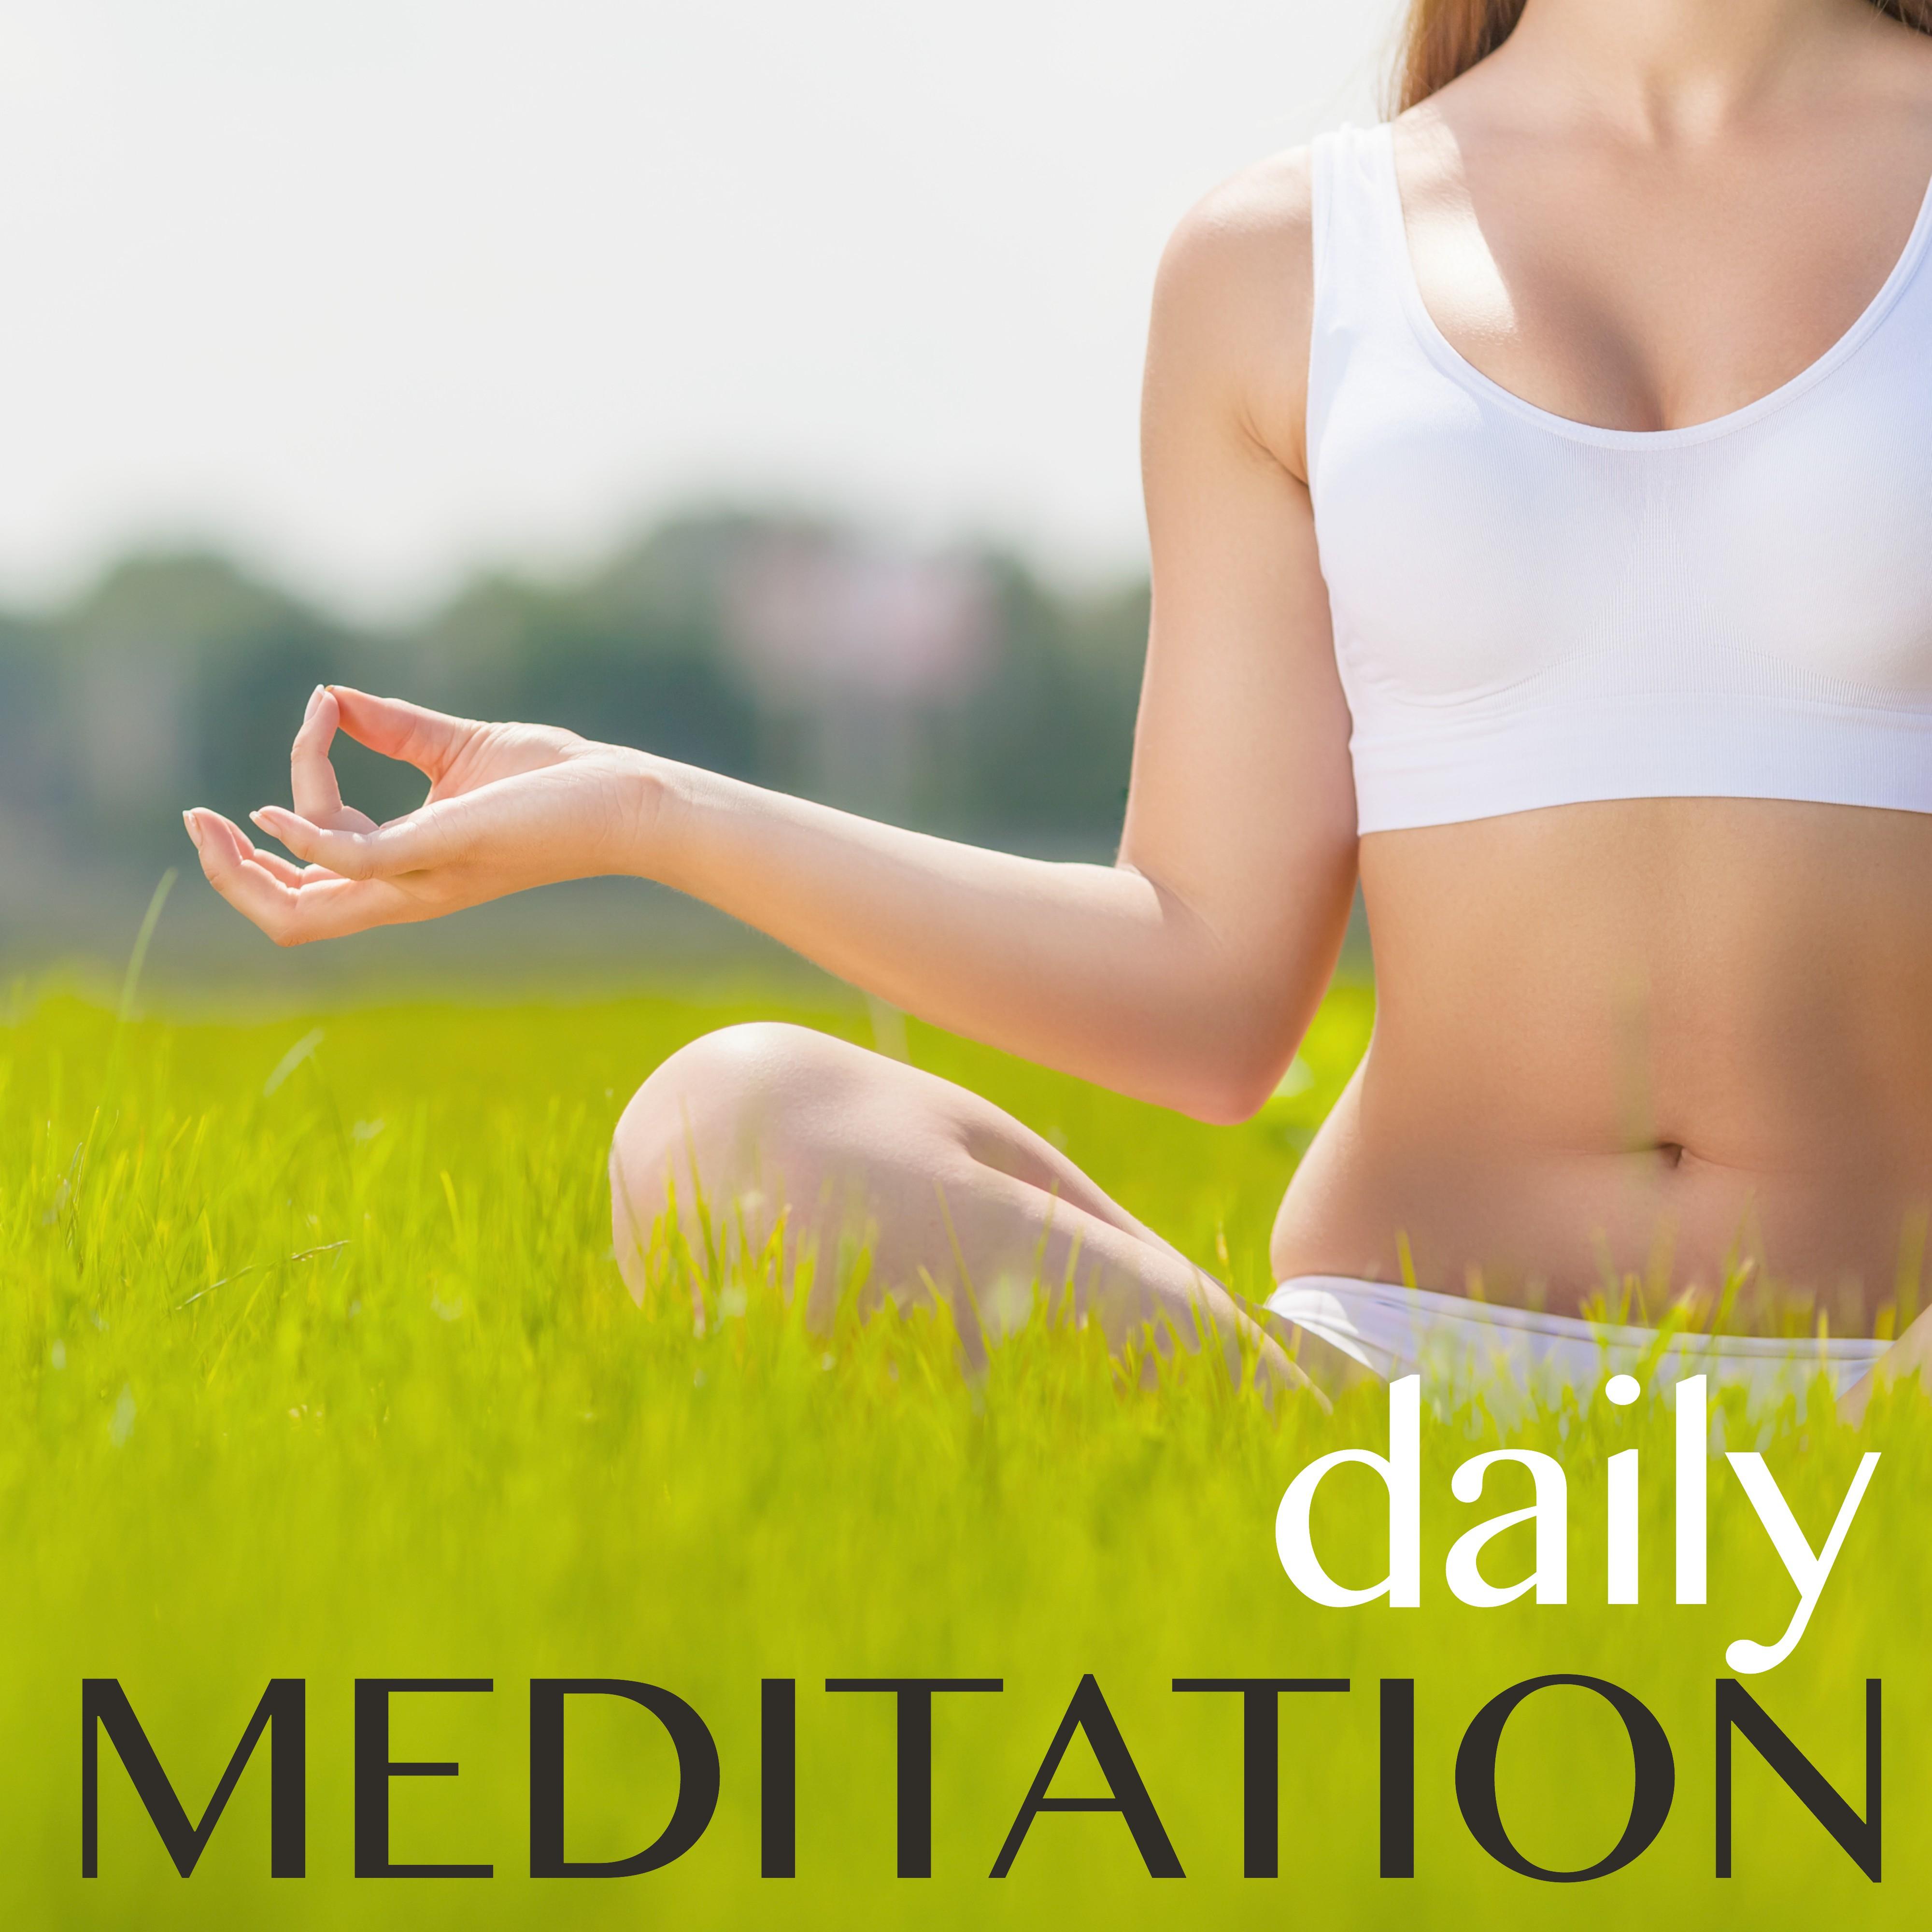 Daily Meditation - Asian Zen Meditation Healing Music, New Age Songs and Nature Sounds for Reiki and Yoga